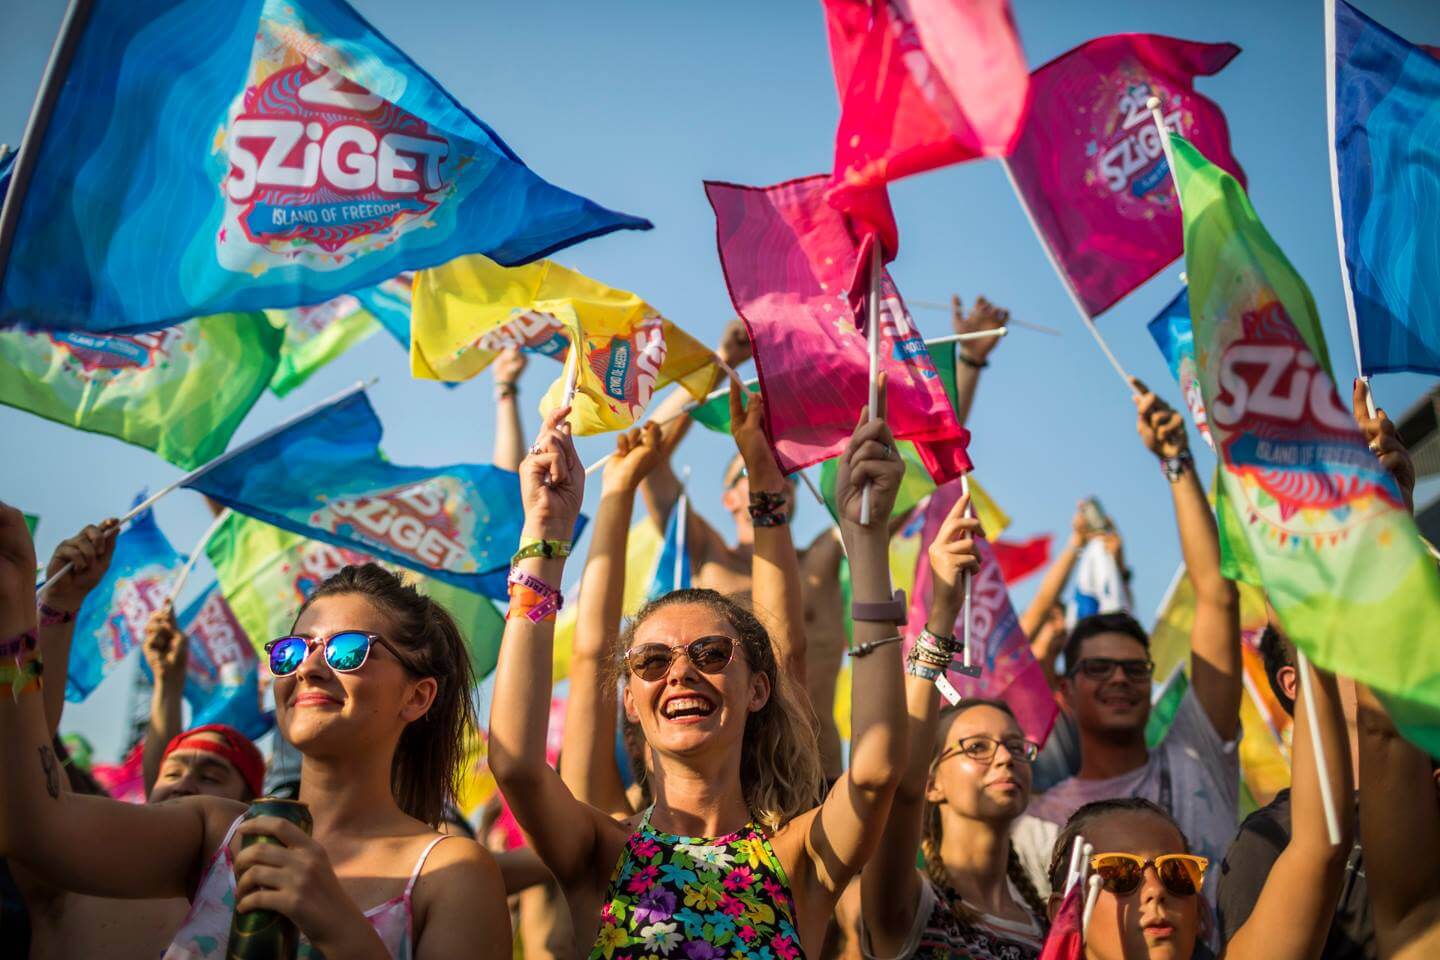 Sziget Festival review